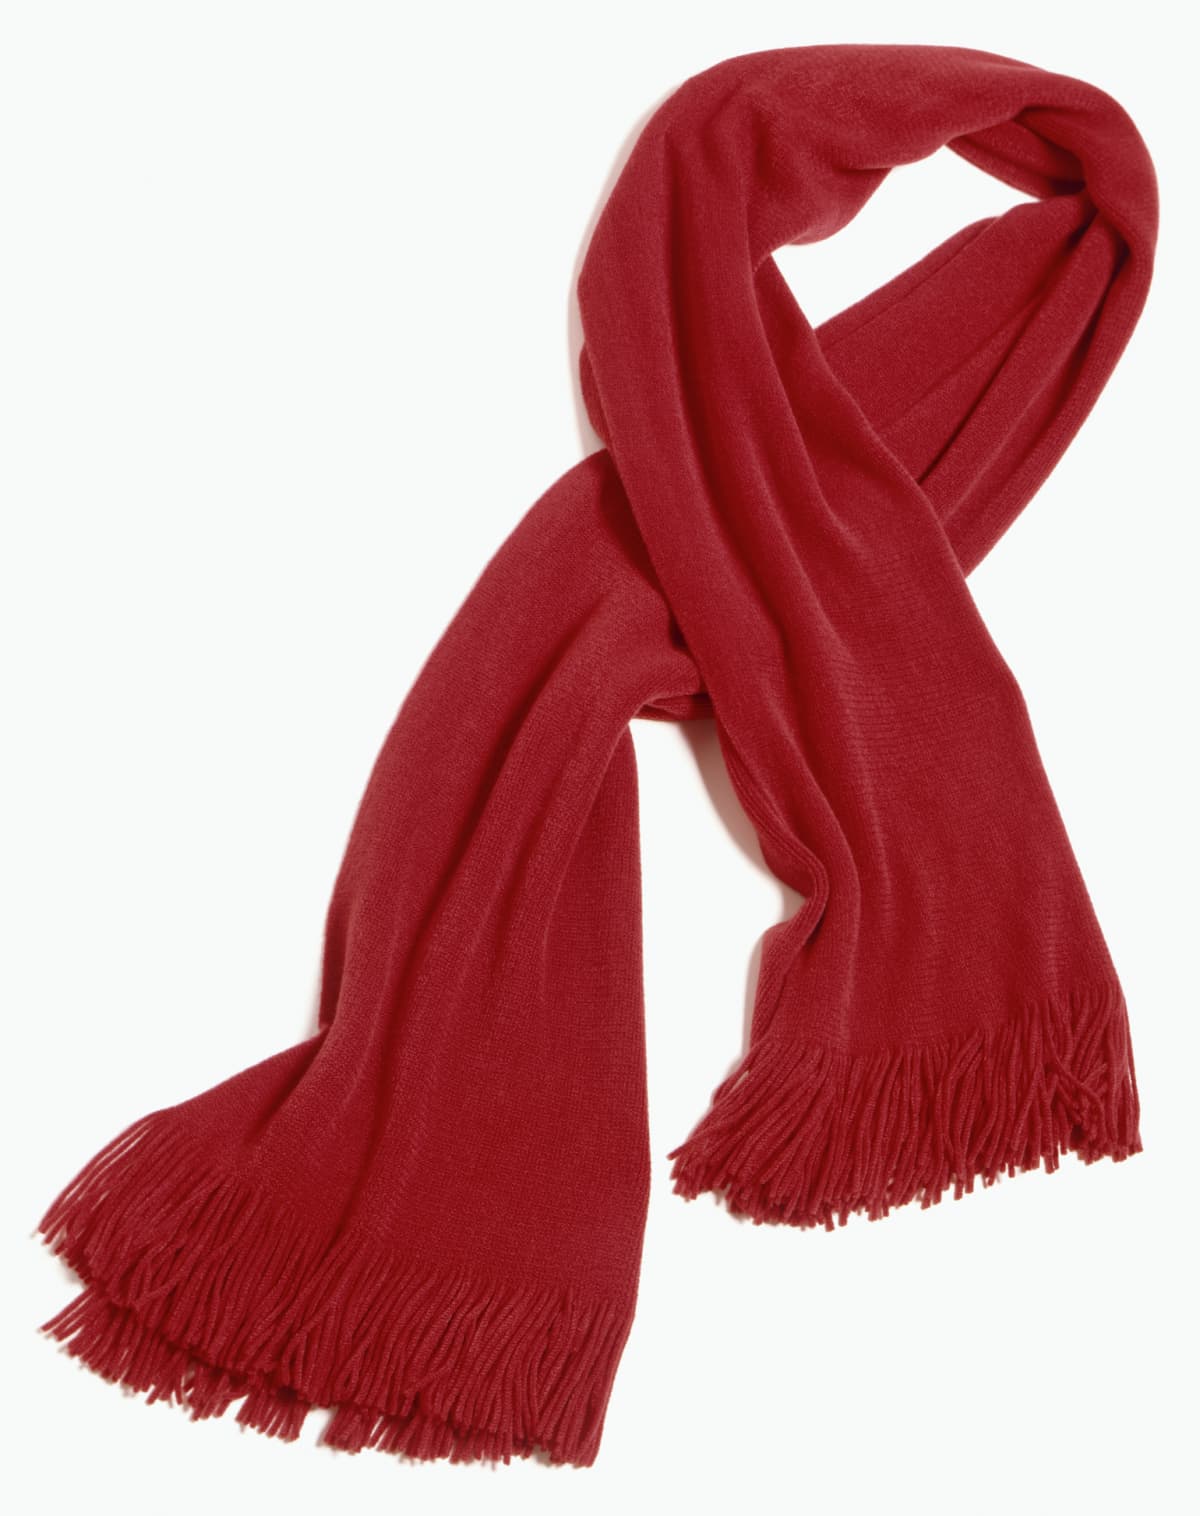 red scarf against white background